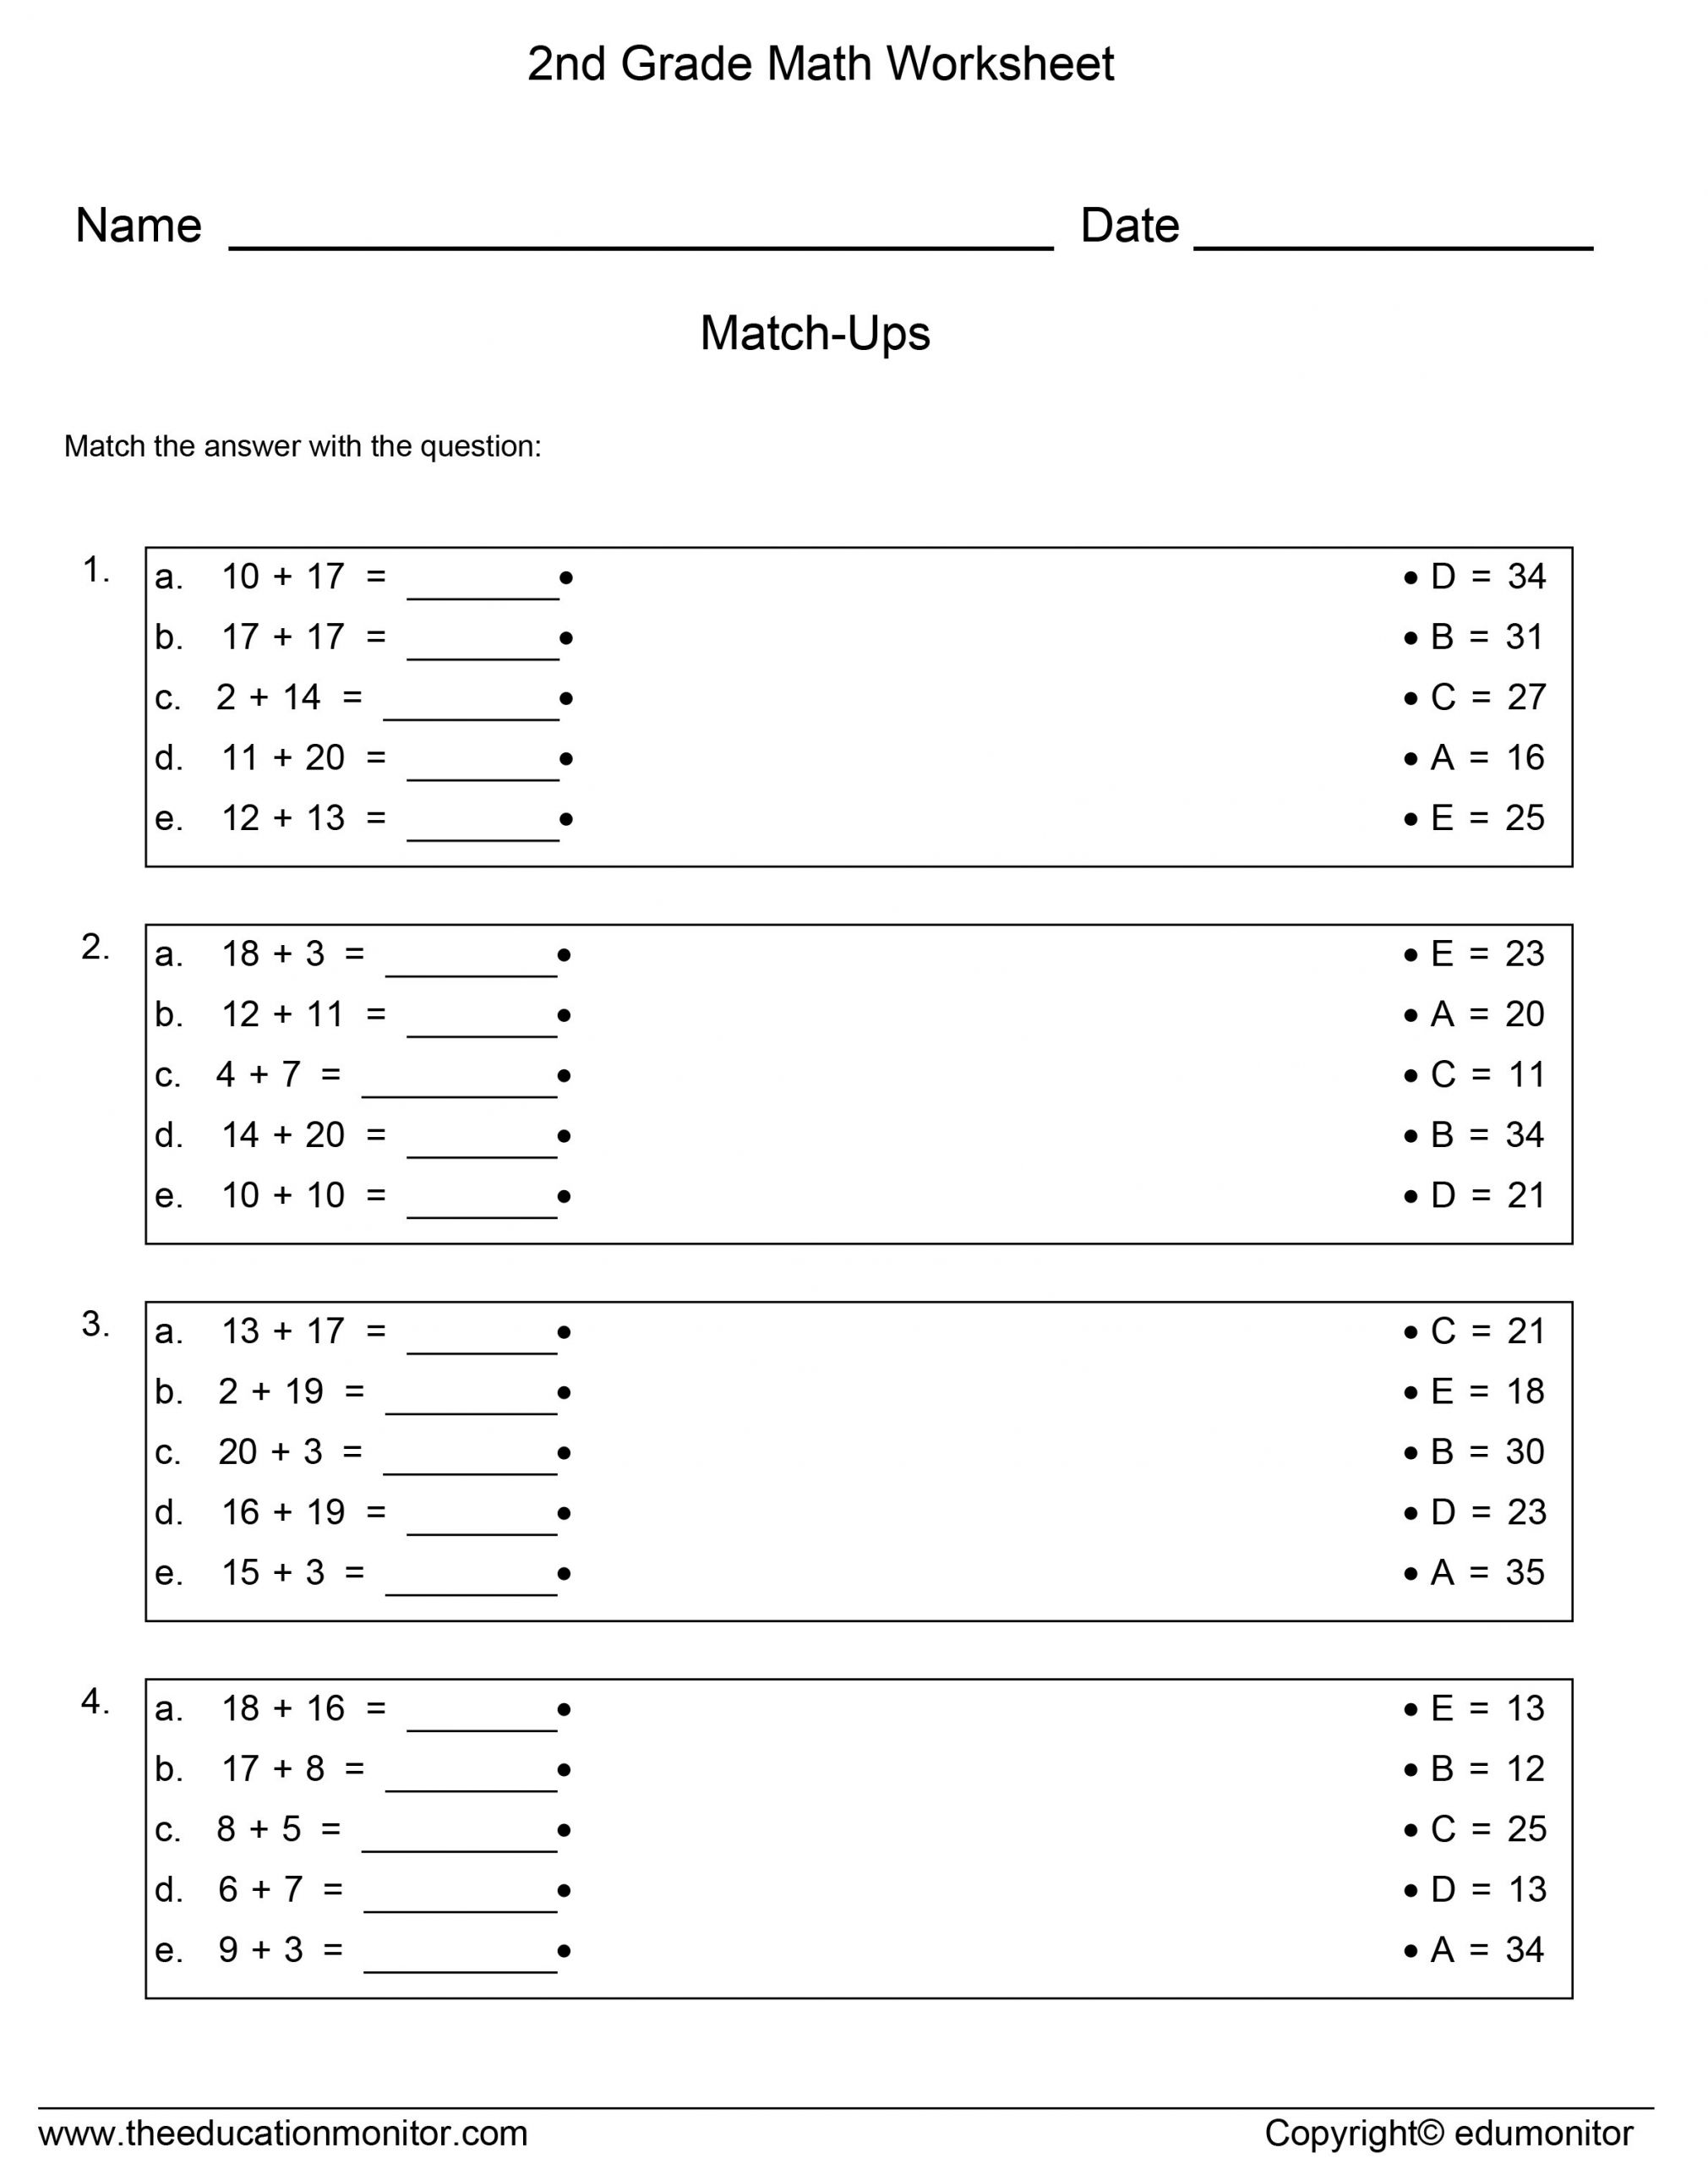 Free Math Worksheets Second Grade 2 Addition Adding 2 Numbers Sum Under 10